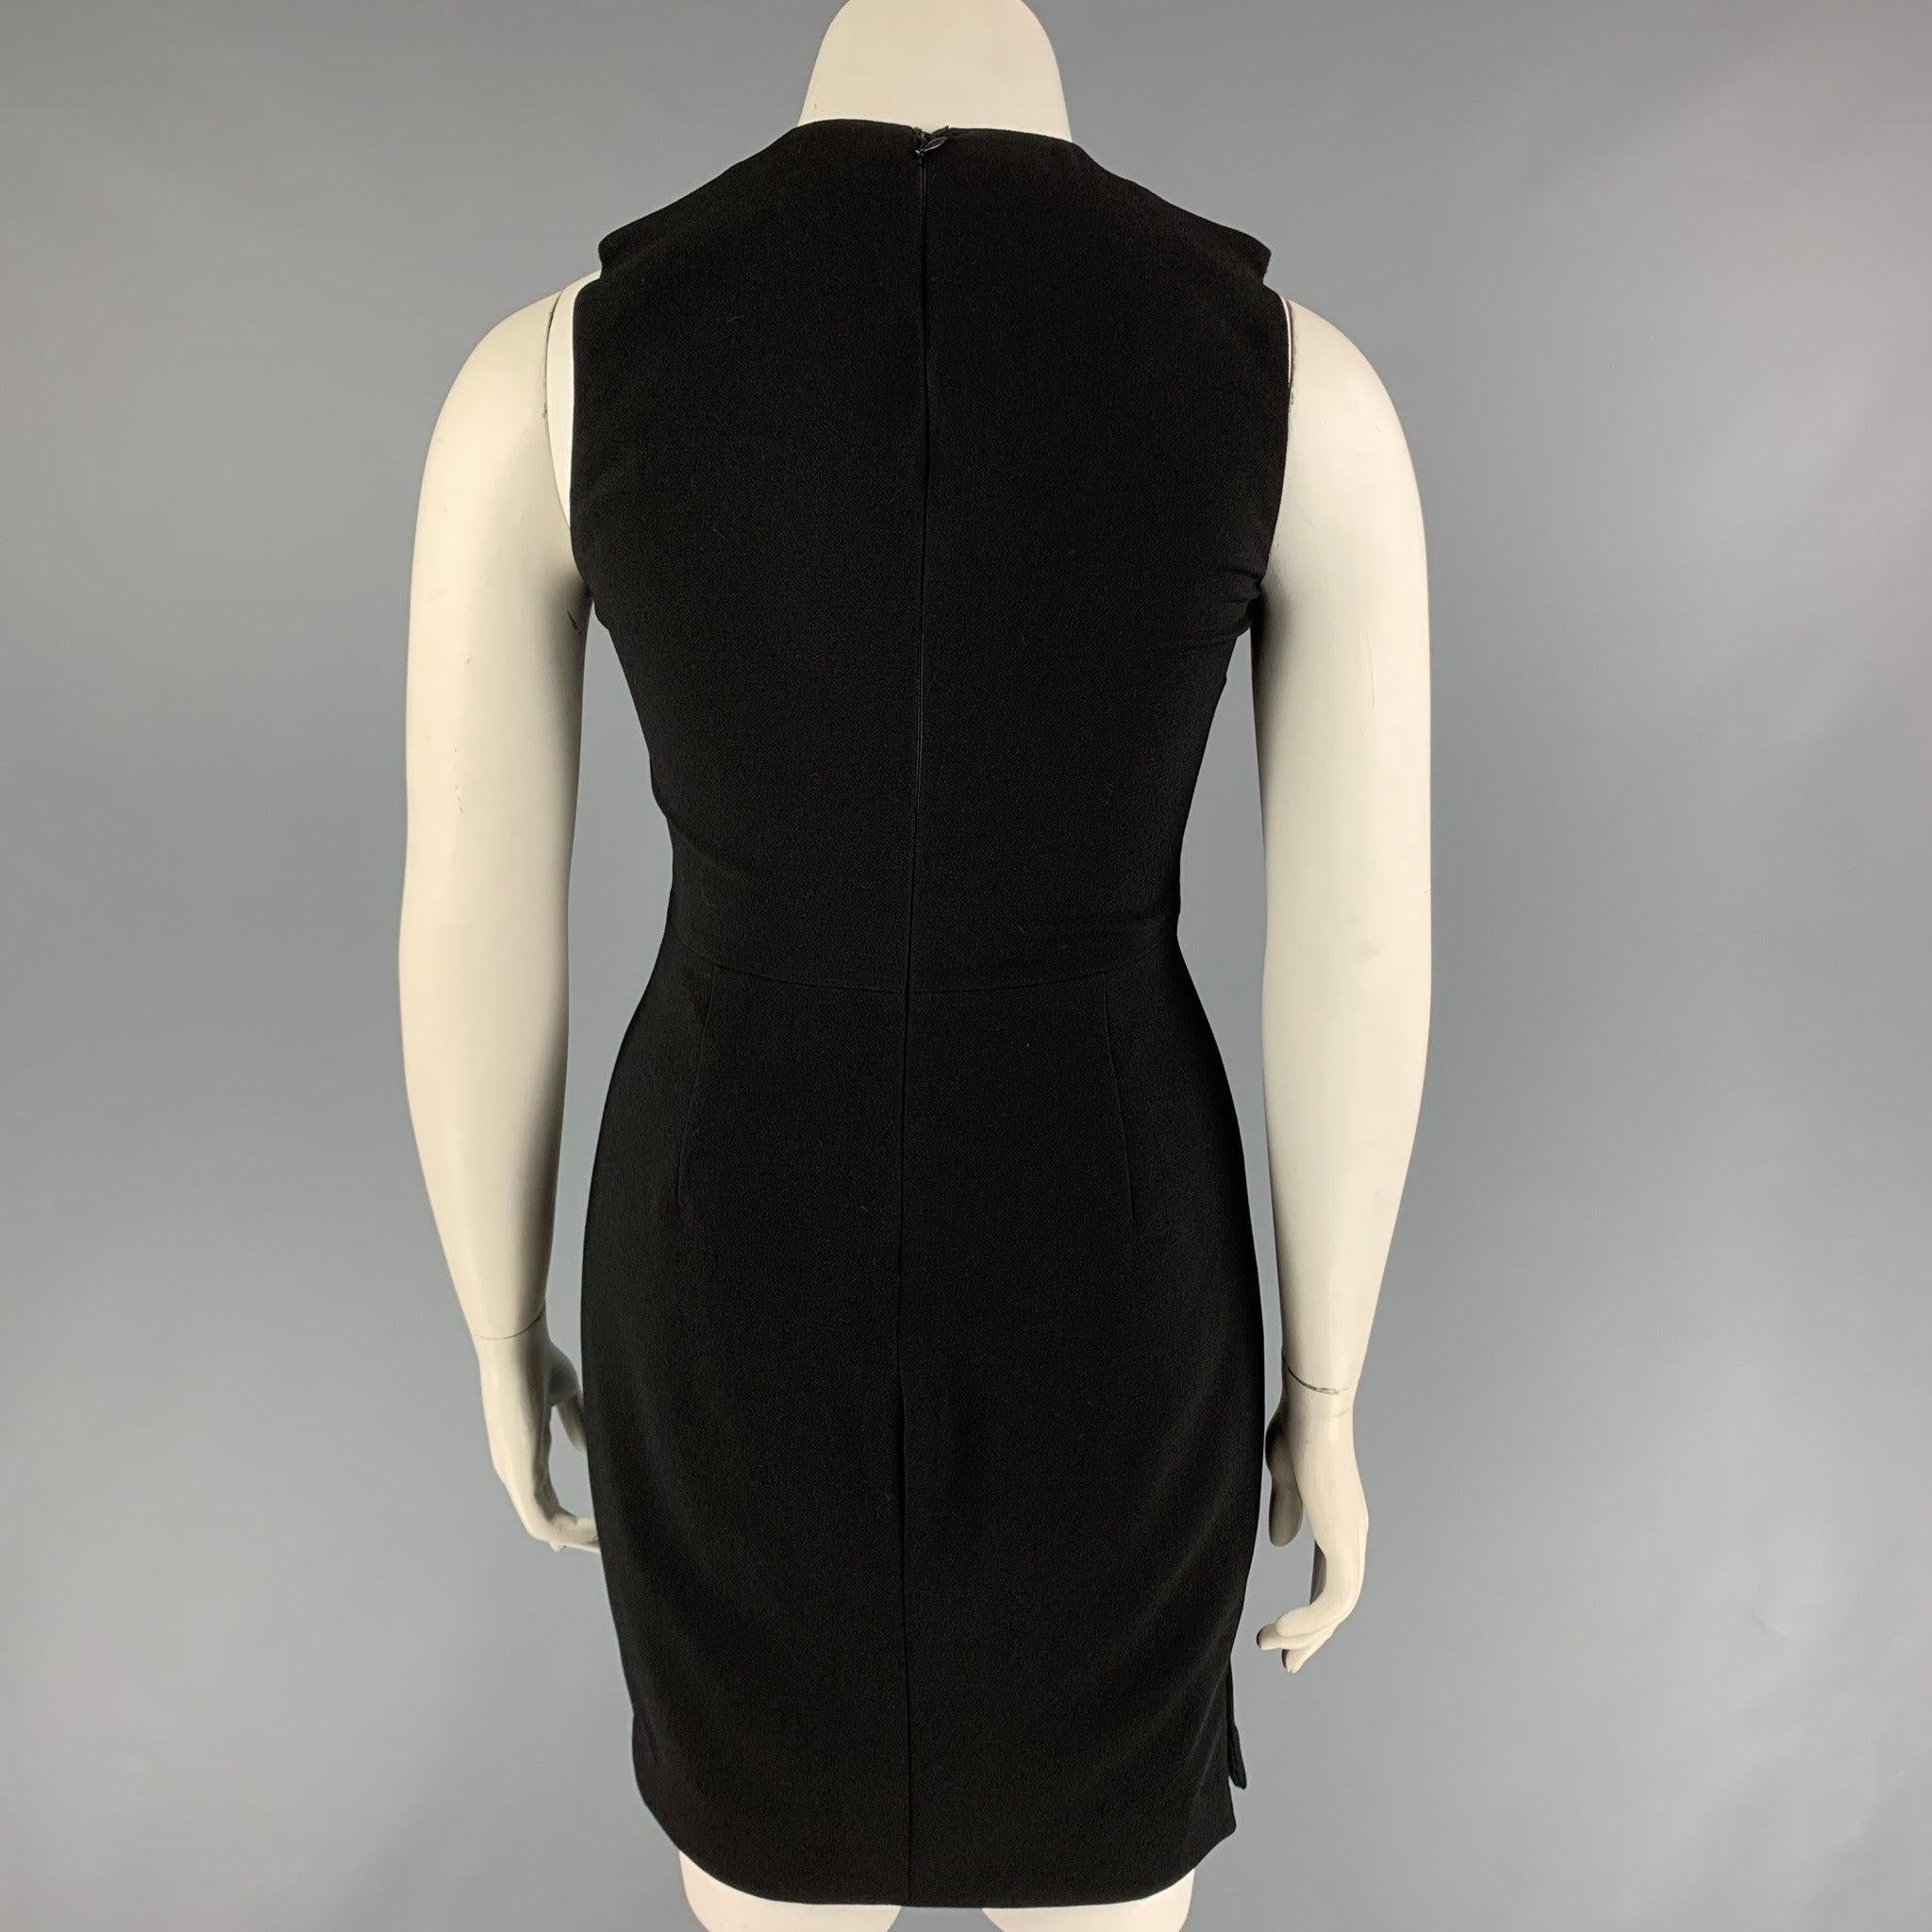 PRABAL GURUNG Size 10 Black Polyester Lambskin Sheath Dress In Good Condition For Sale In San Francisco, CA